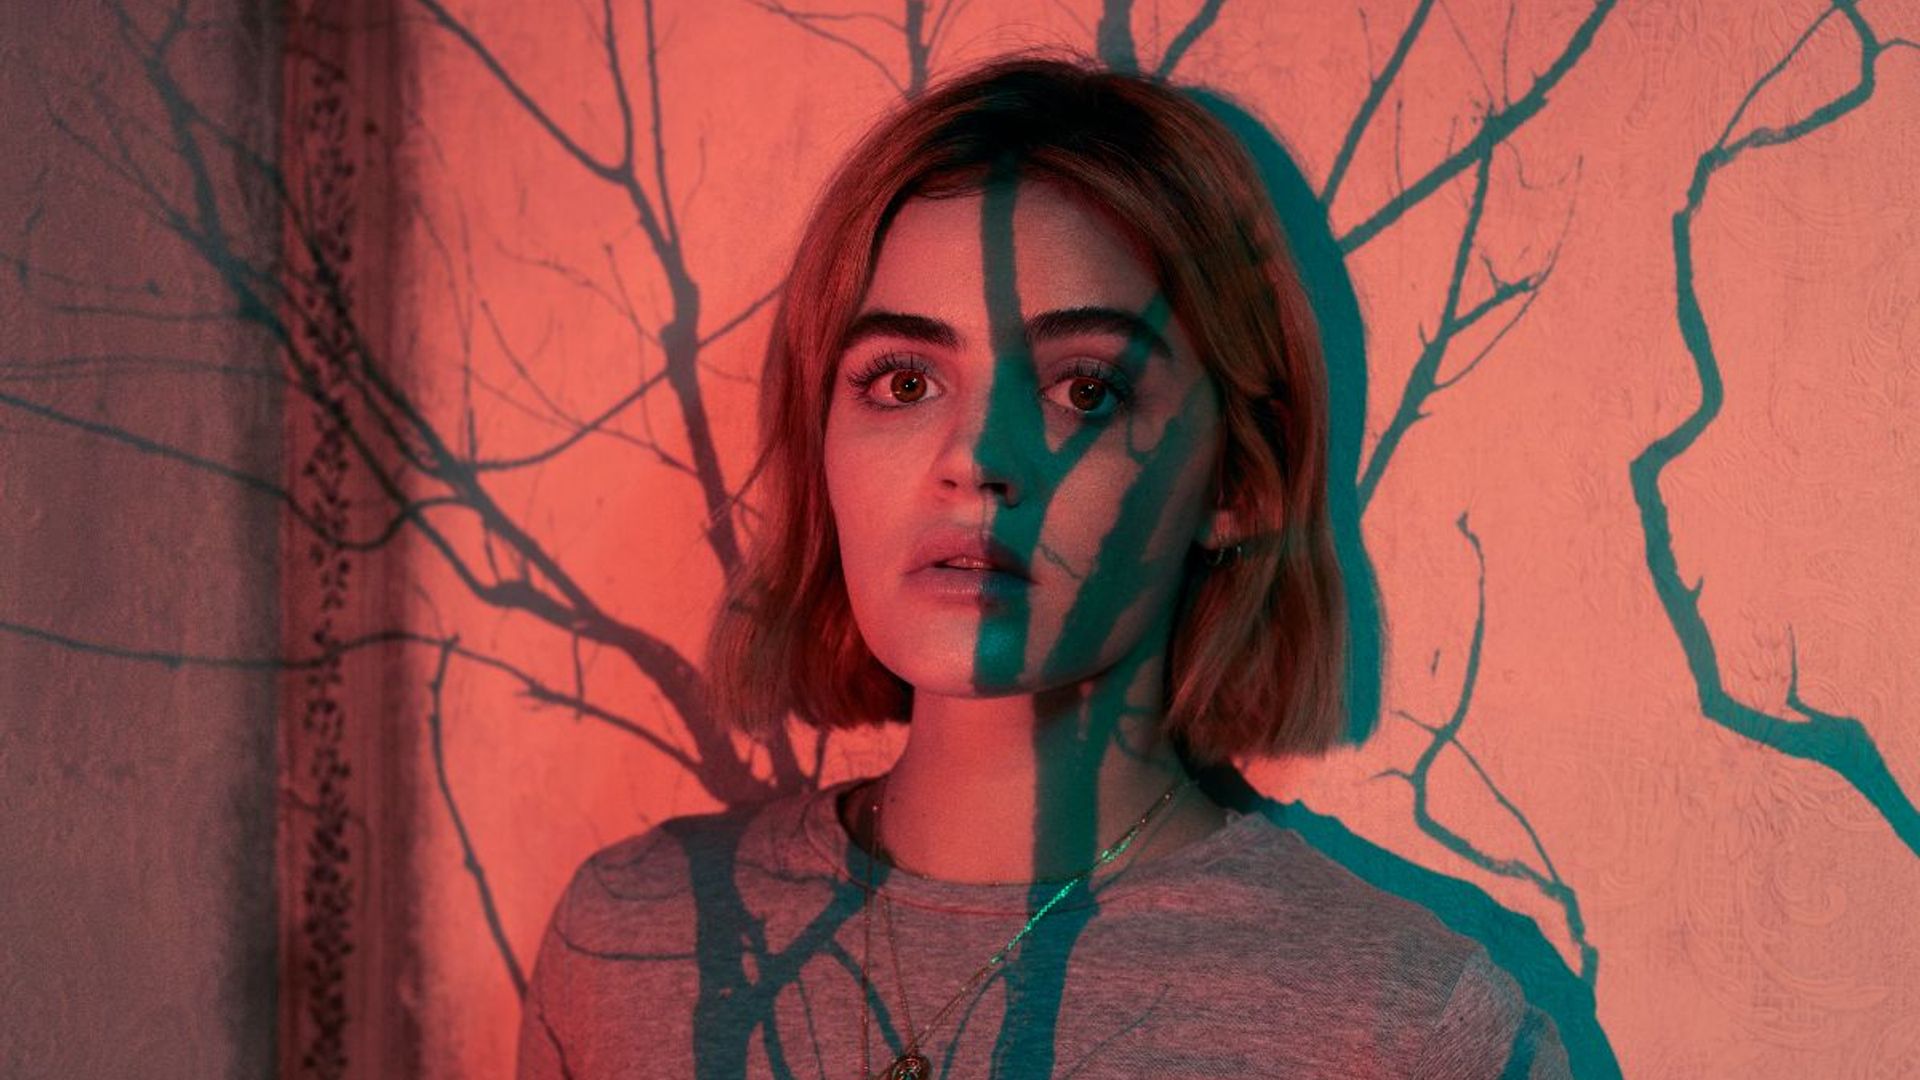 Ragdoll: everything you need to know about the new thriller starring Lucy Hale